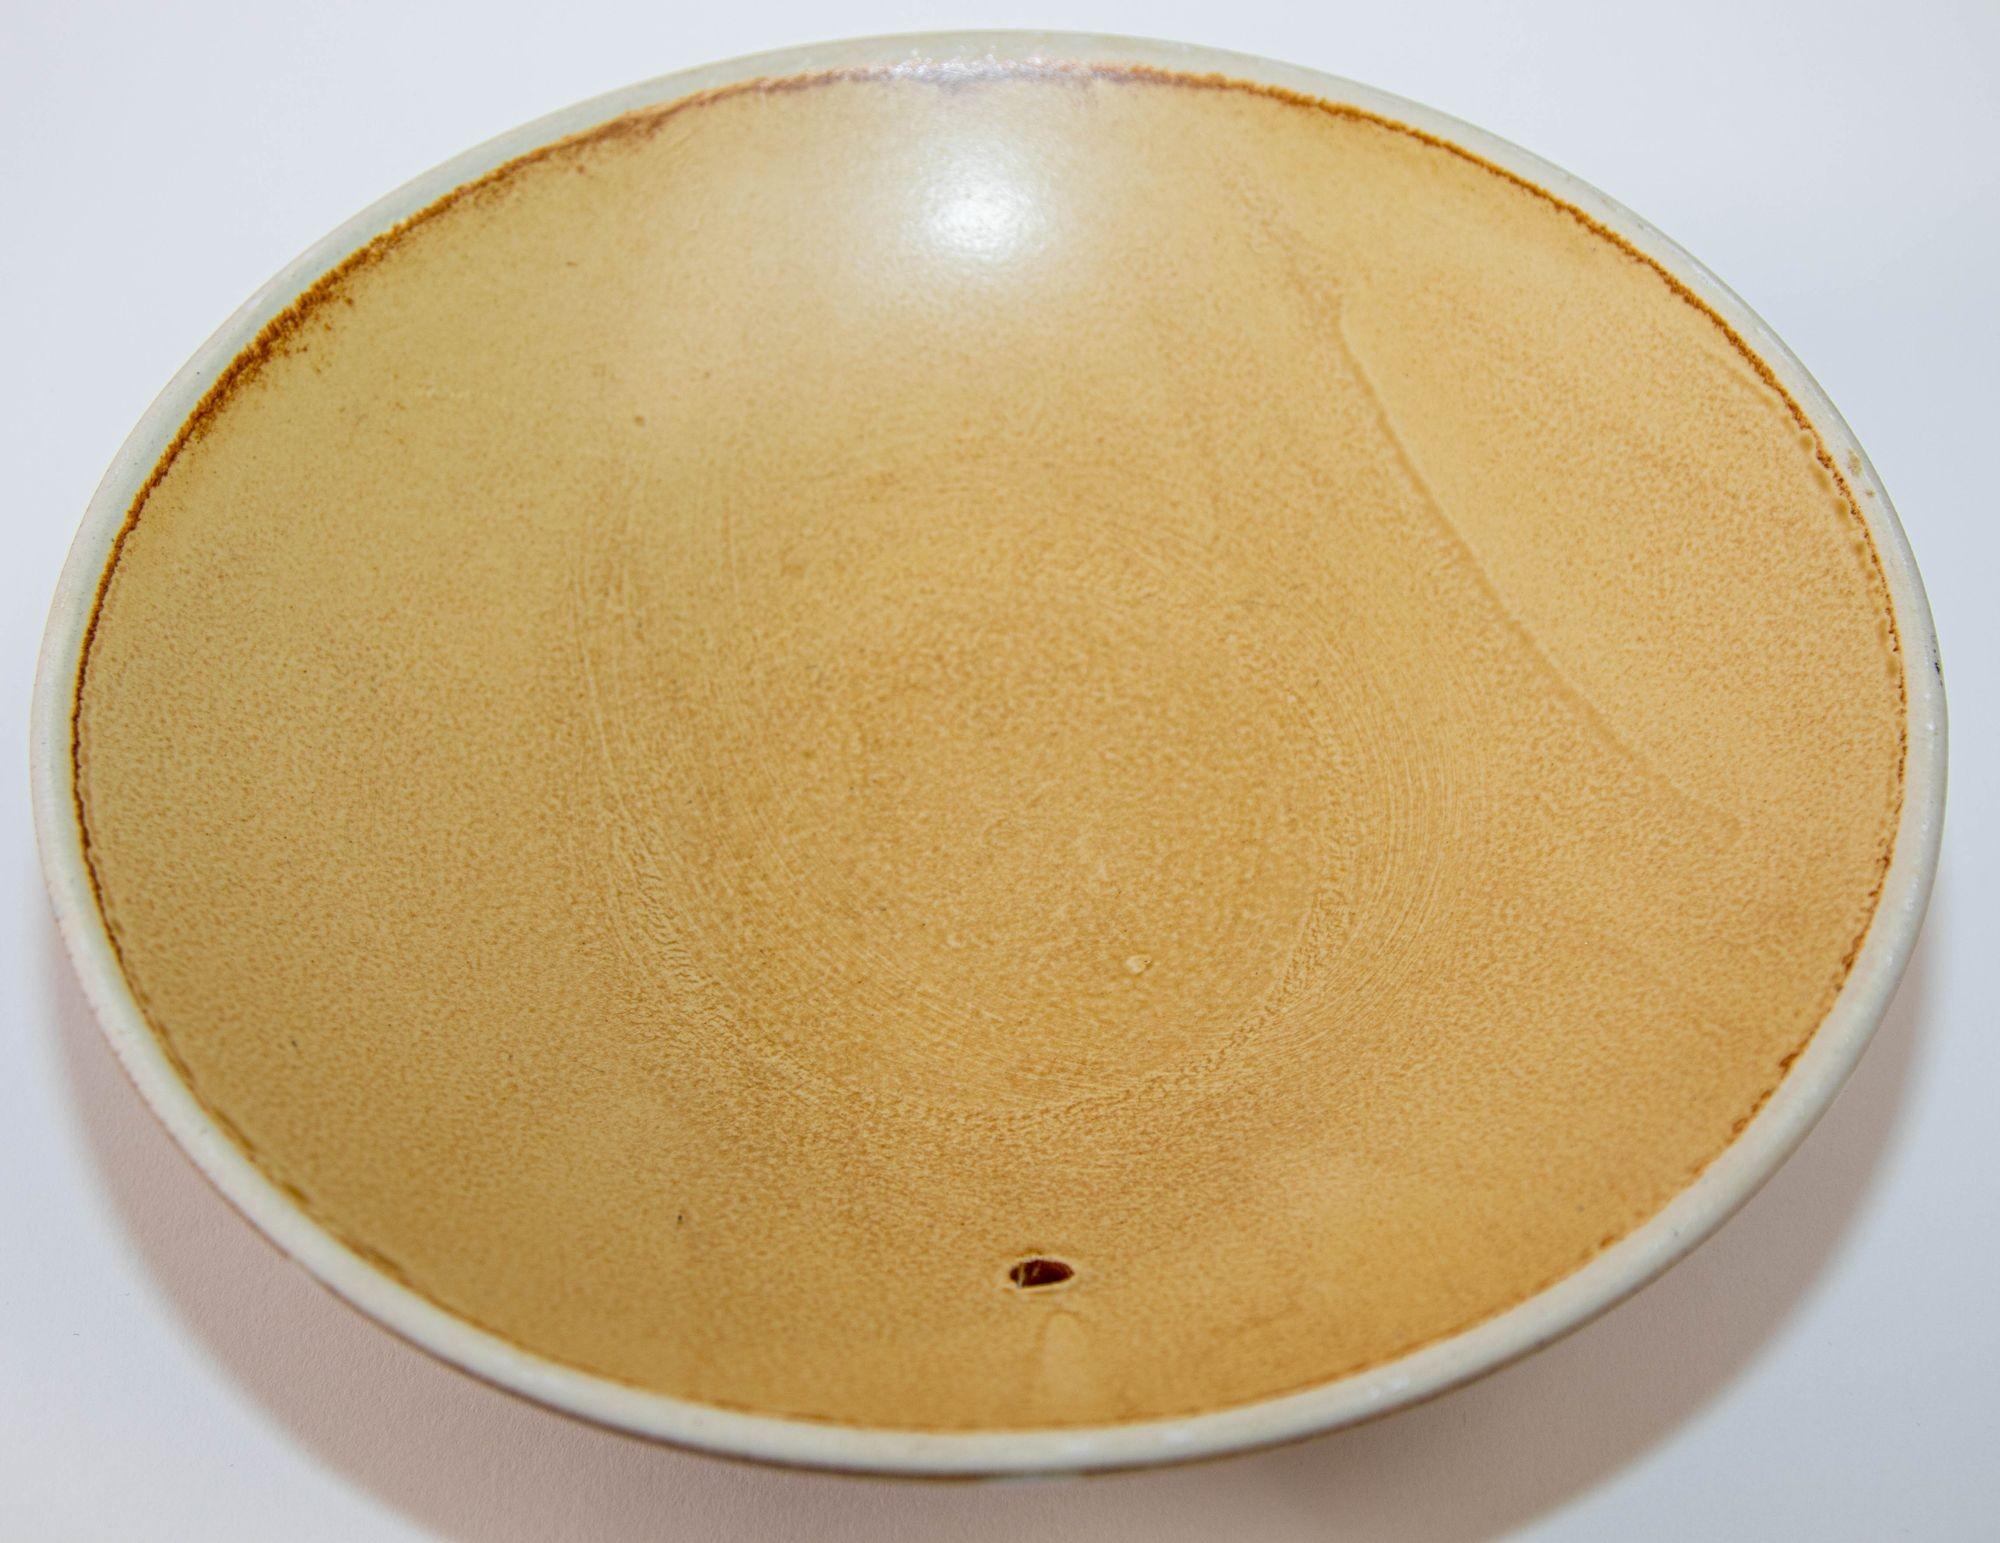 Vintage Mid Century Japanese Pottery Shallow Footed Bowl Wabi Sabi Honey Color 10 inches Diameter.
Circa 1950, Made in Japan.
Handcrafted pottery Japanese honey color on top with cream and dark brown geometric lines on the bottom, textured glazed